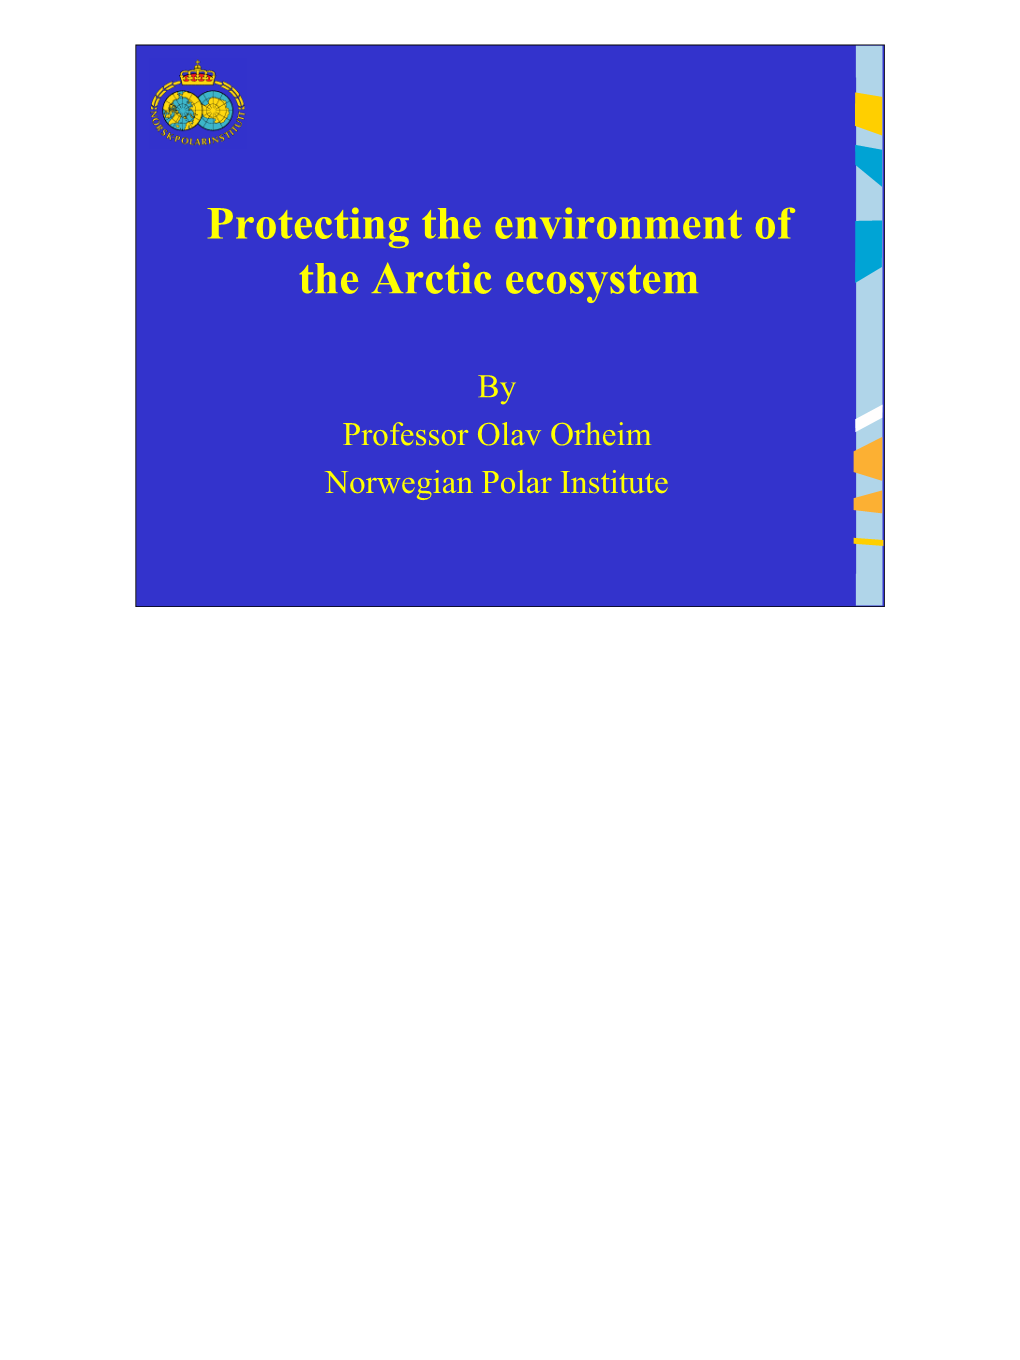 Protecting the Environment of the Arctic Ecosystem